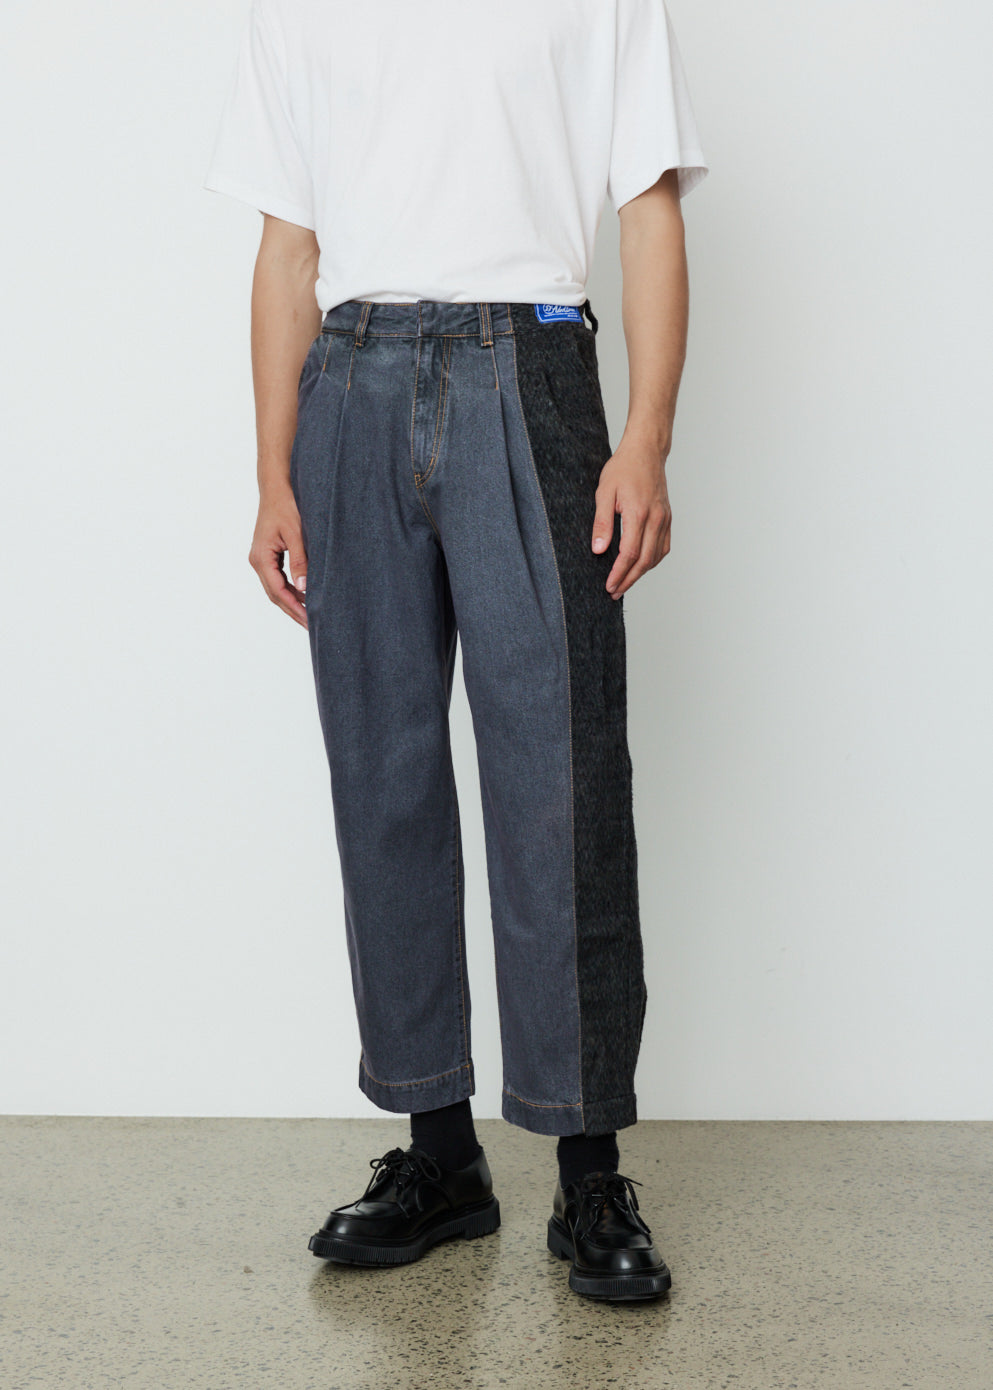 Panelled Pleated Jeans